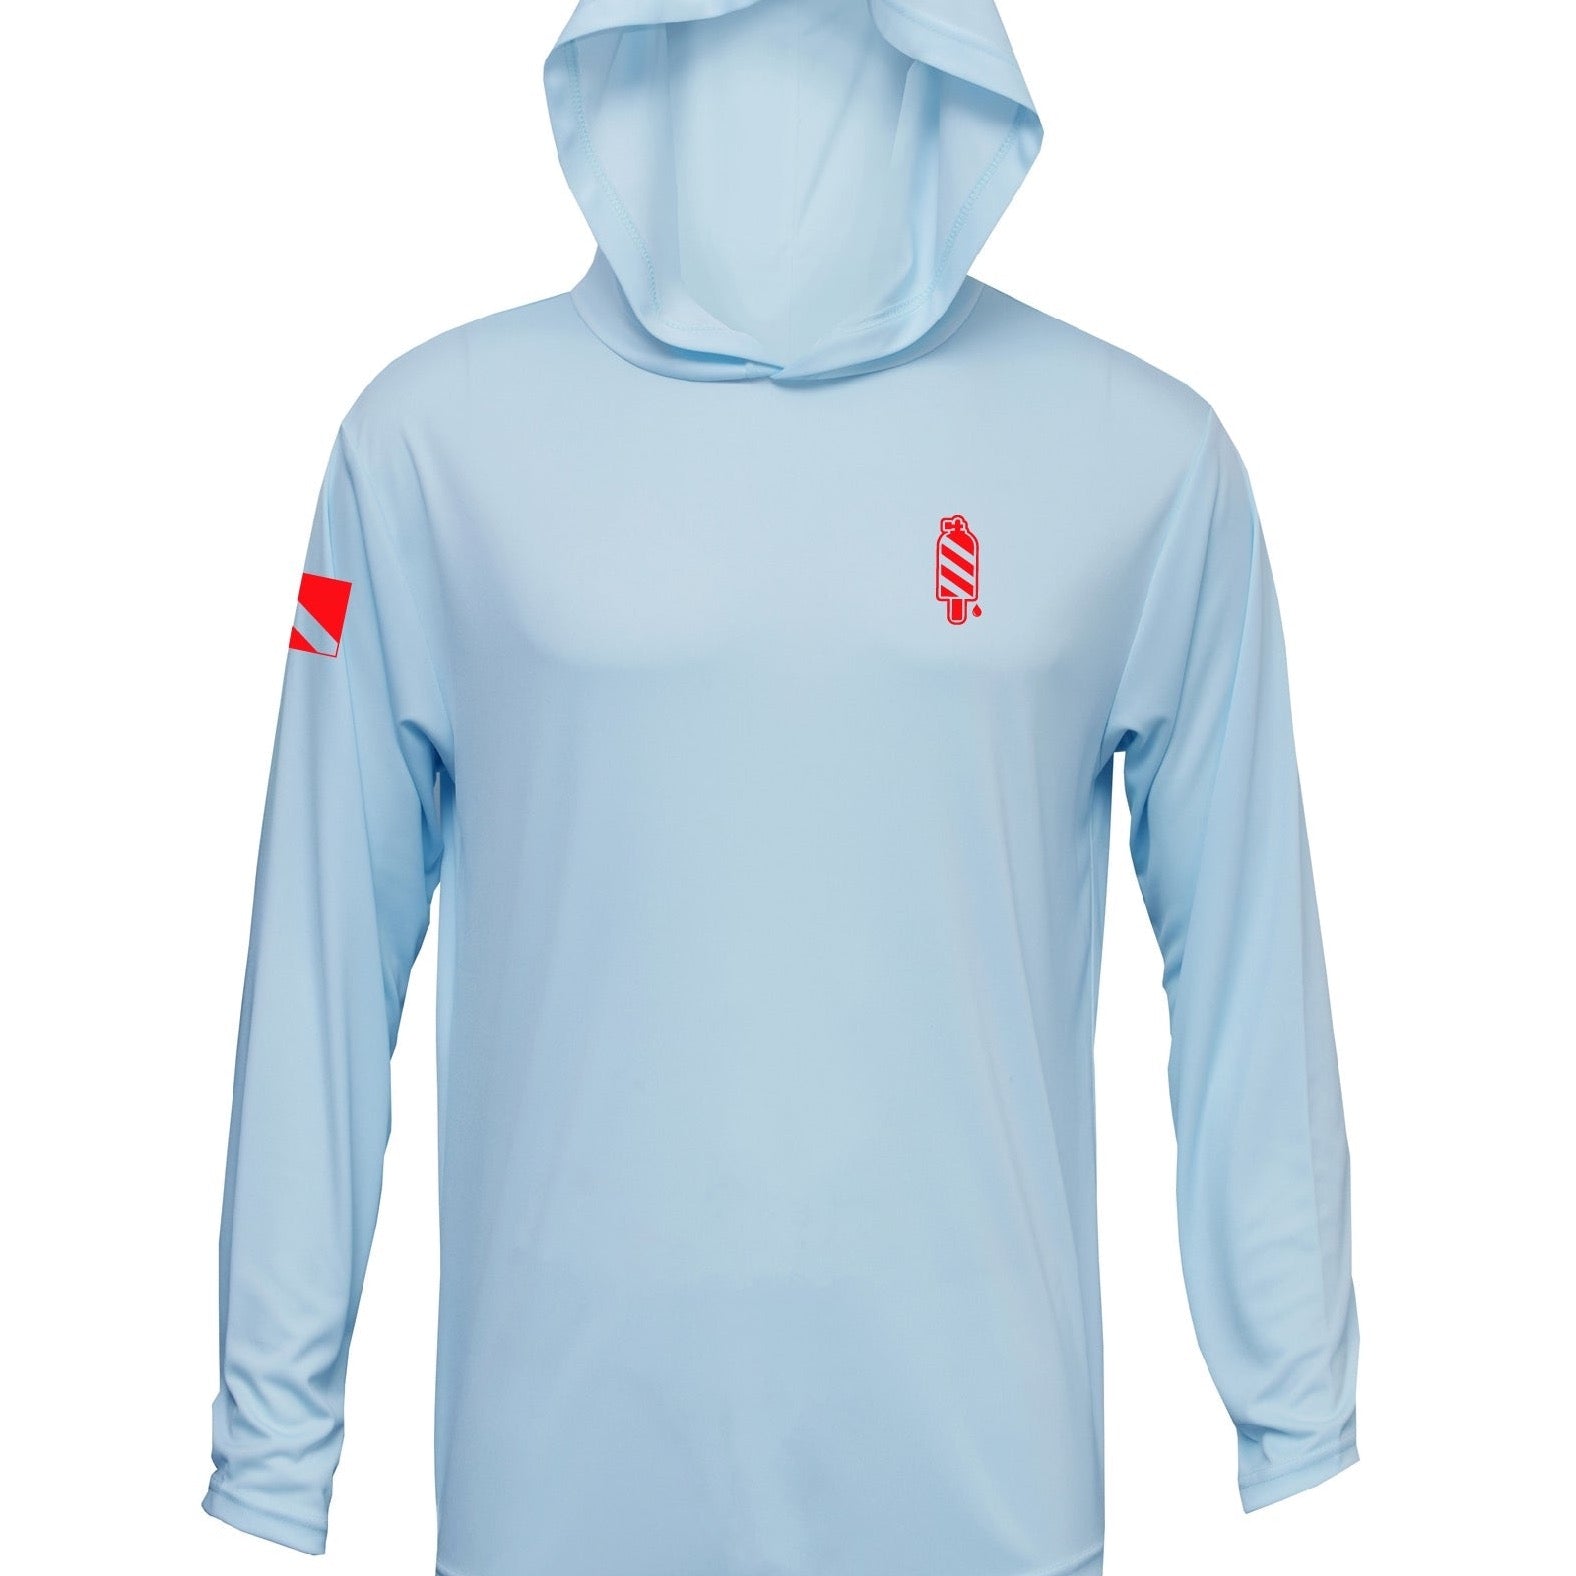 Blue Sweetwater shirt with hood (front)